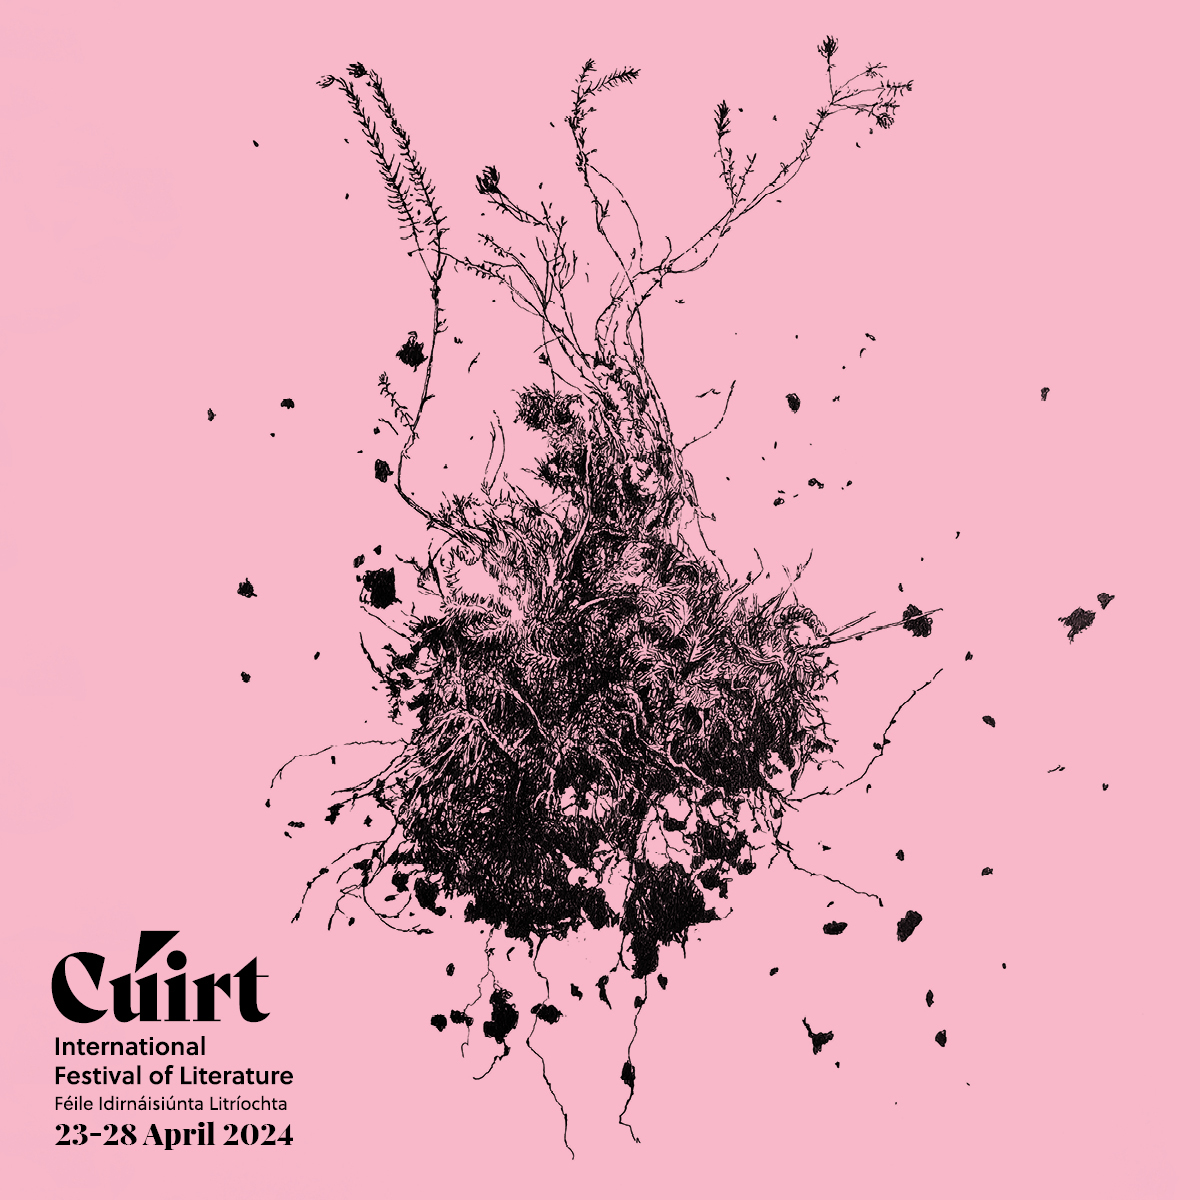 💫The Cúirt 2024 programme is now live Discover the full programme online now at cuirt.ie and join us this April 23-28 in Galway. We are honoured to feature this incredible artwork from Galway based artist Miriam de Búrca #Cúirt2024 #galway #discoverireland